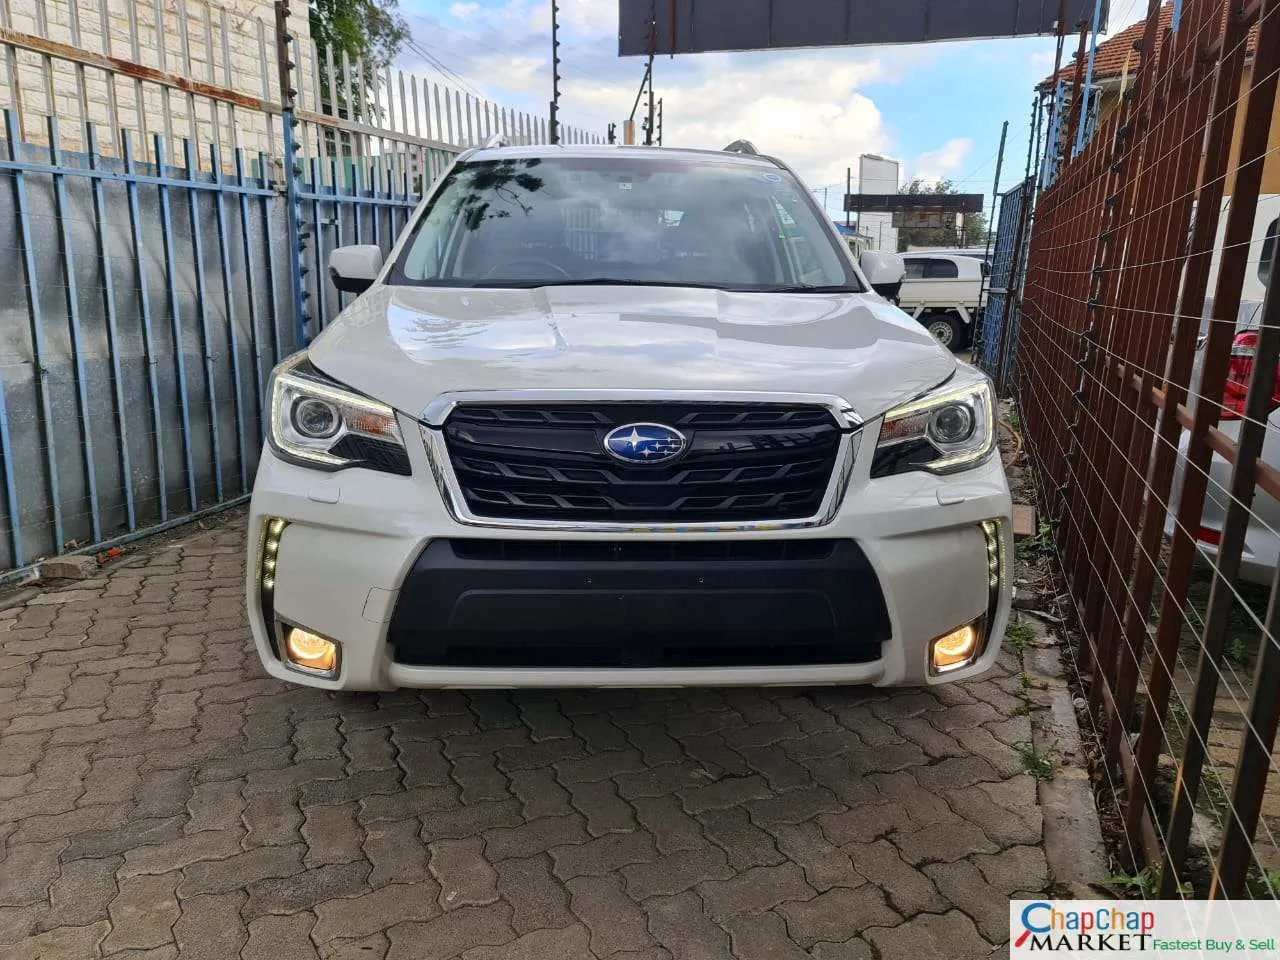 Cars Cars For Sale/Vehicles-Subaru Forester New shape 🔥 You pay Deposit installments Trade in Ok EXCLUSIVE 9